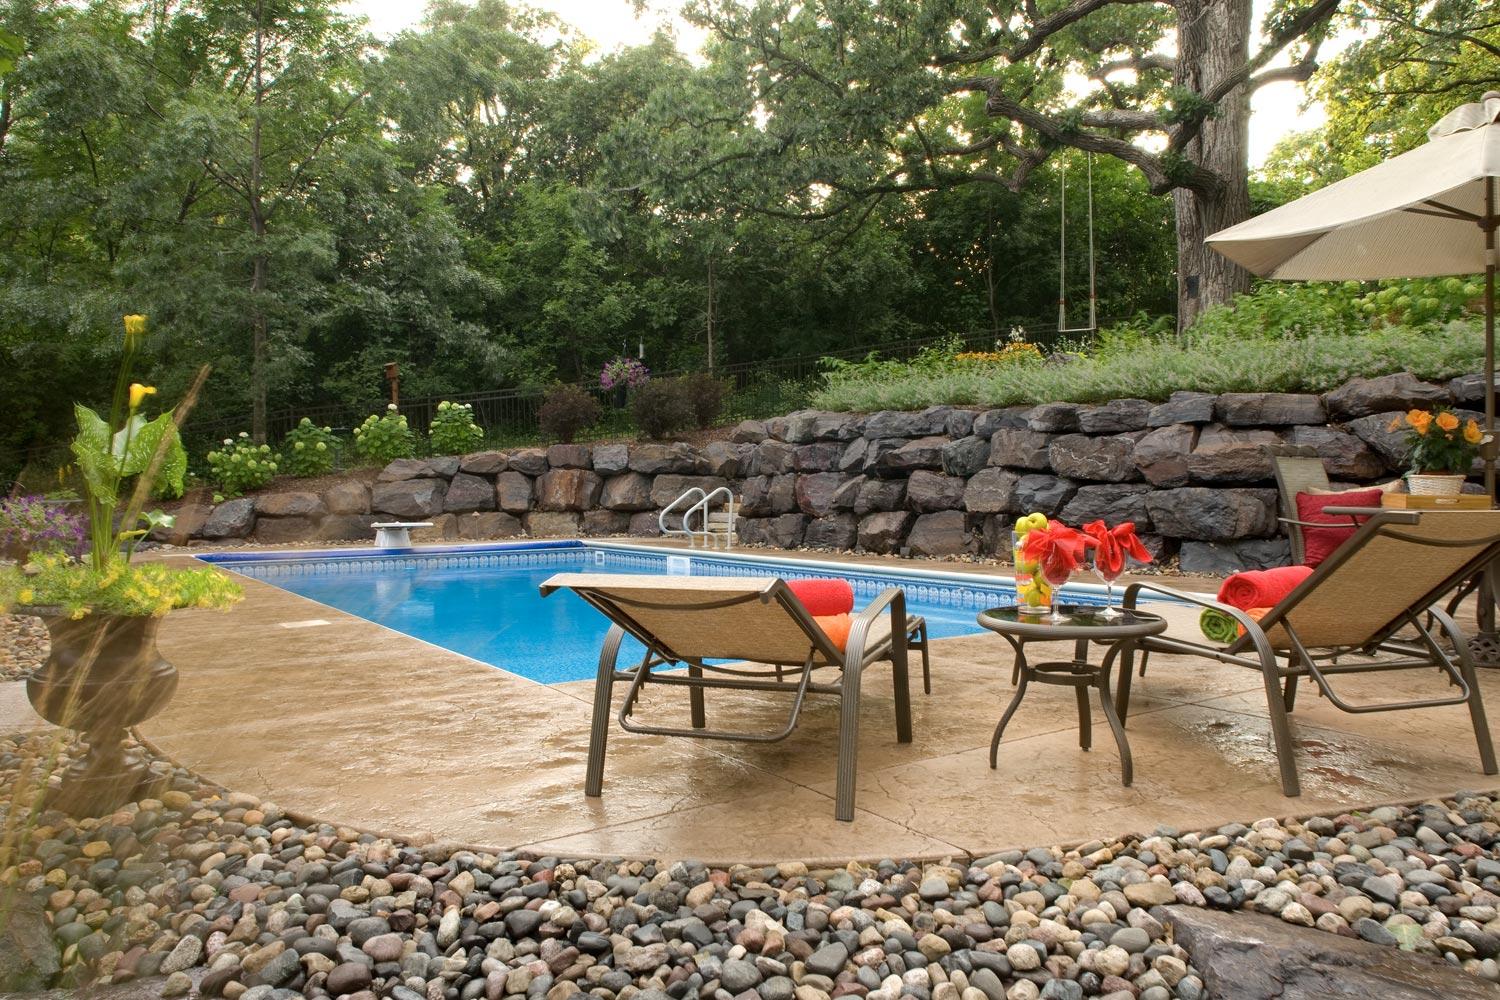 Boulder wall creates space for a swimming pool in this backyard.